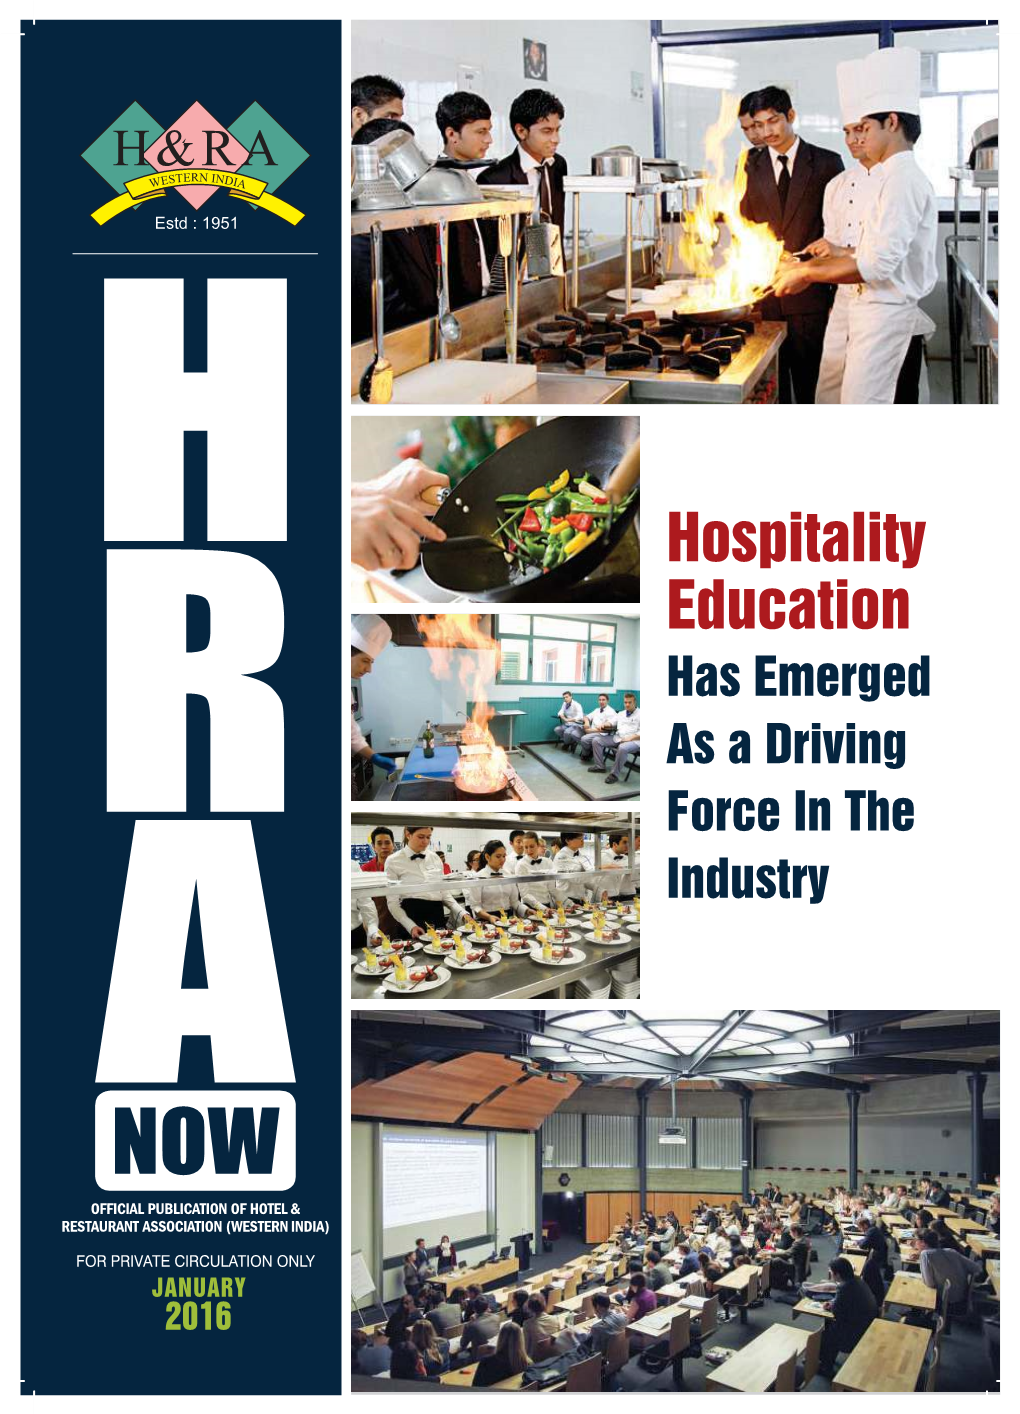 Hospitality Education Has Emerged As a Driving Force in the Industry